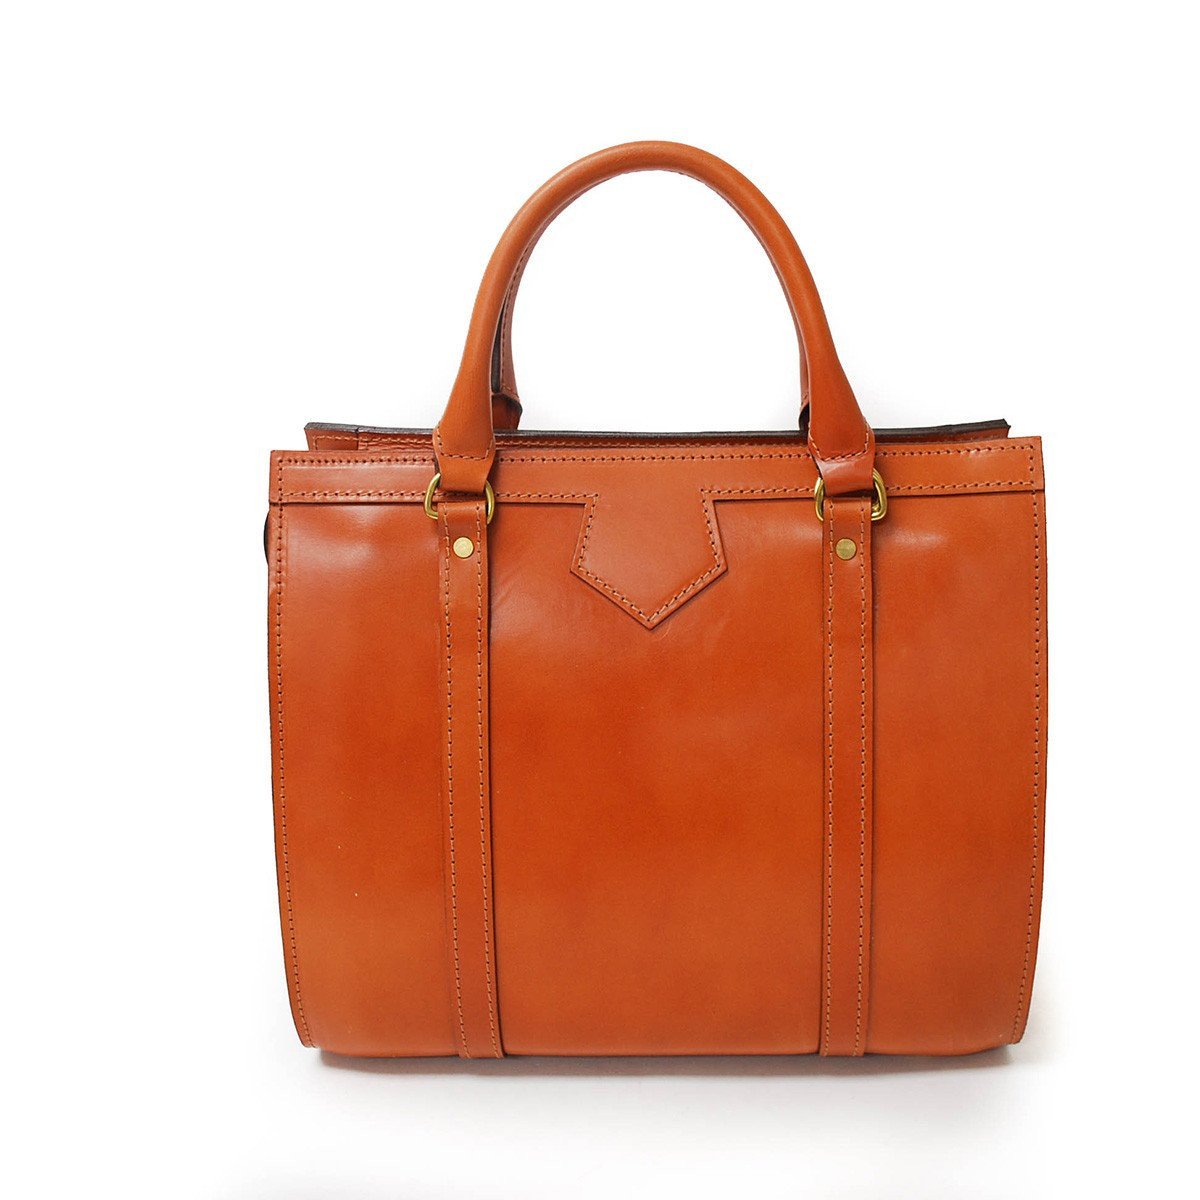 Classic Beatrice Handbag, Dark London Tan | Hand Stitched | English Leather | Sterling and Burke-Handbag-Sterling-and-Burke